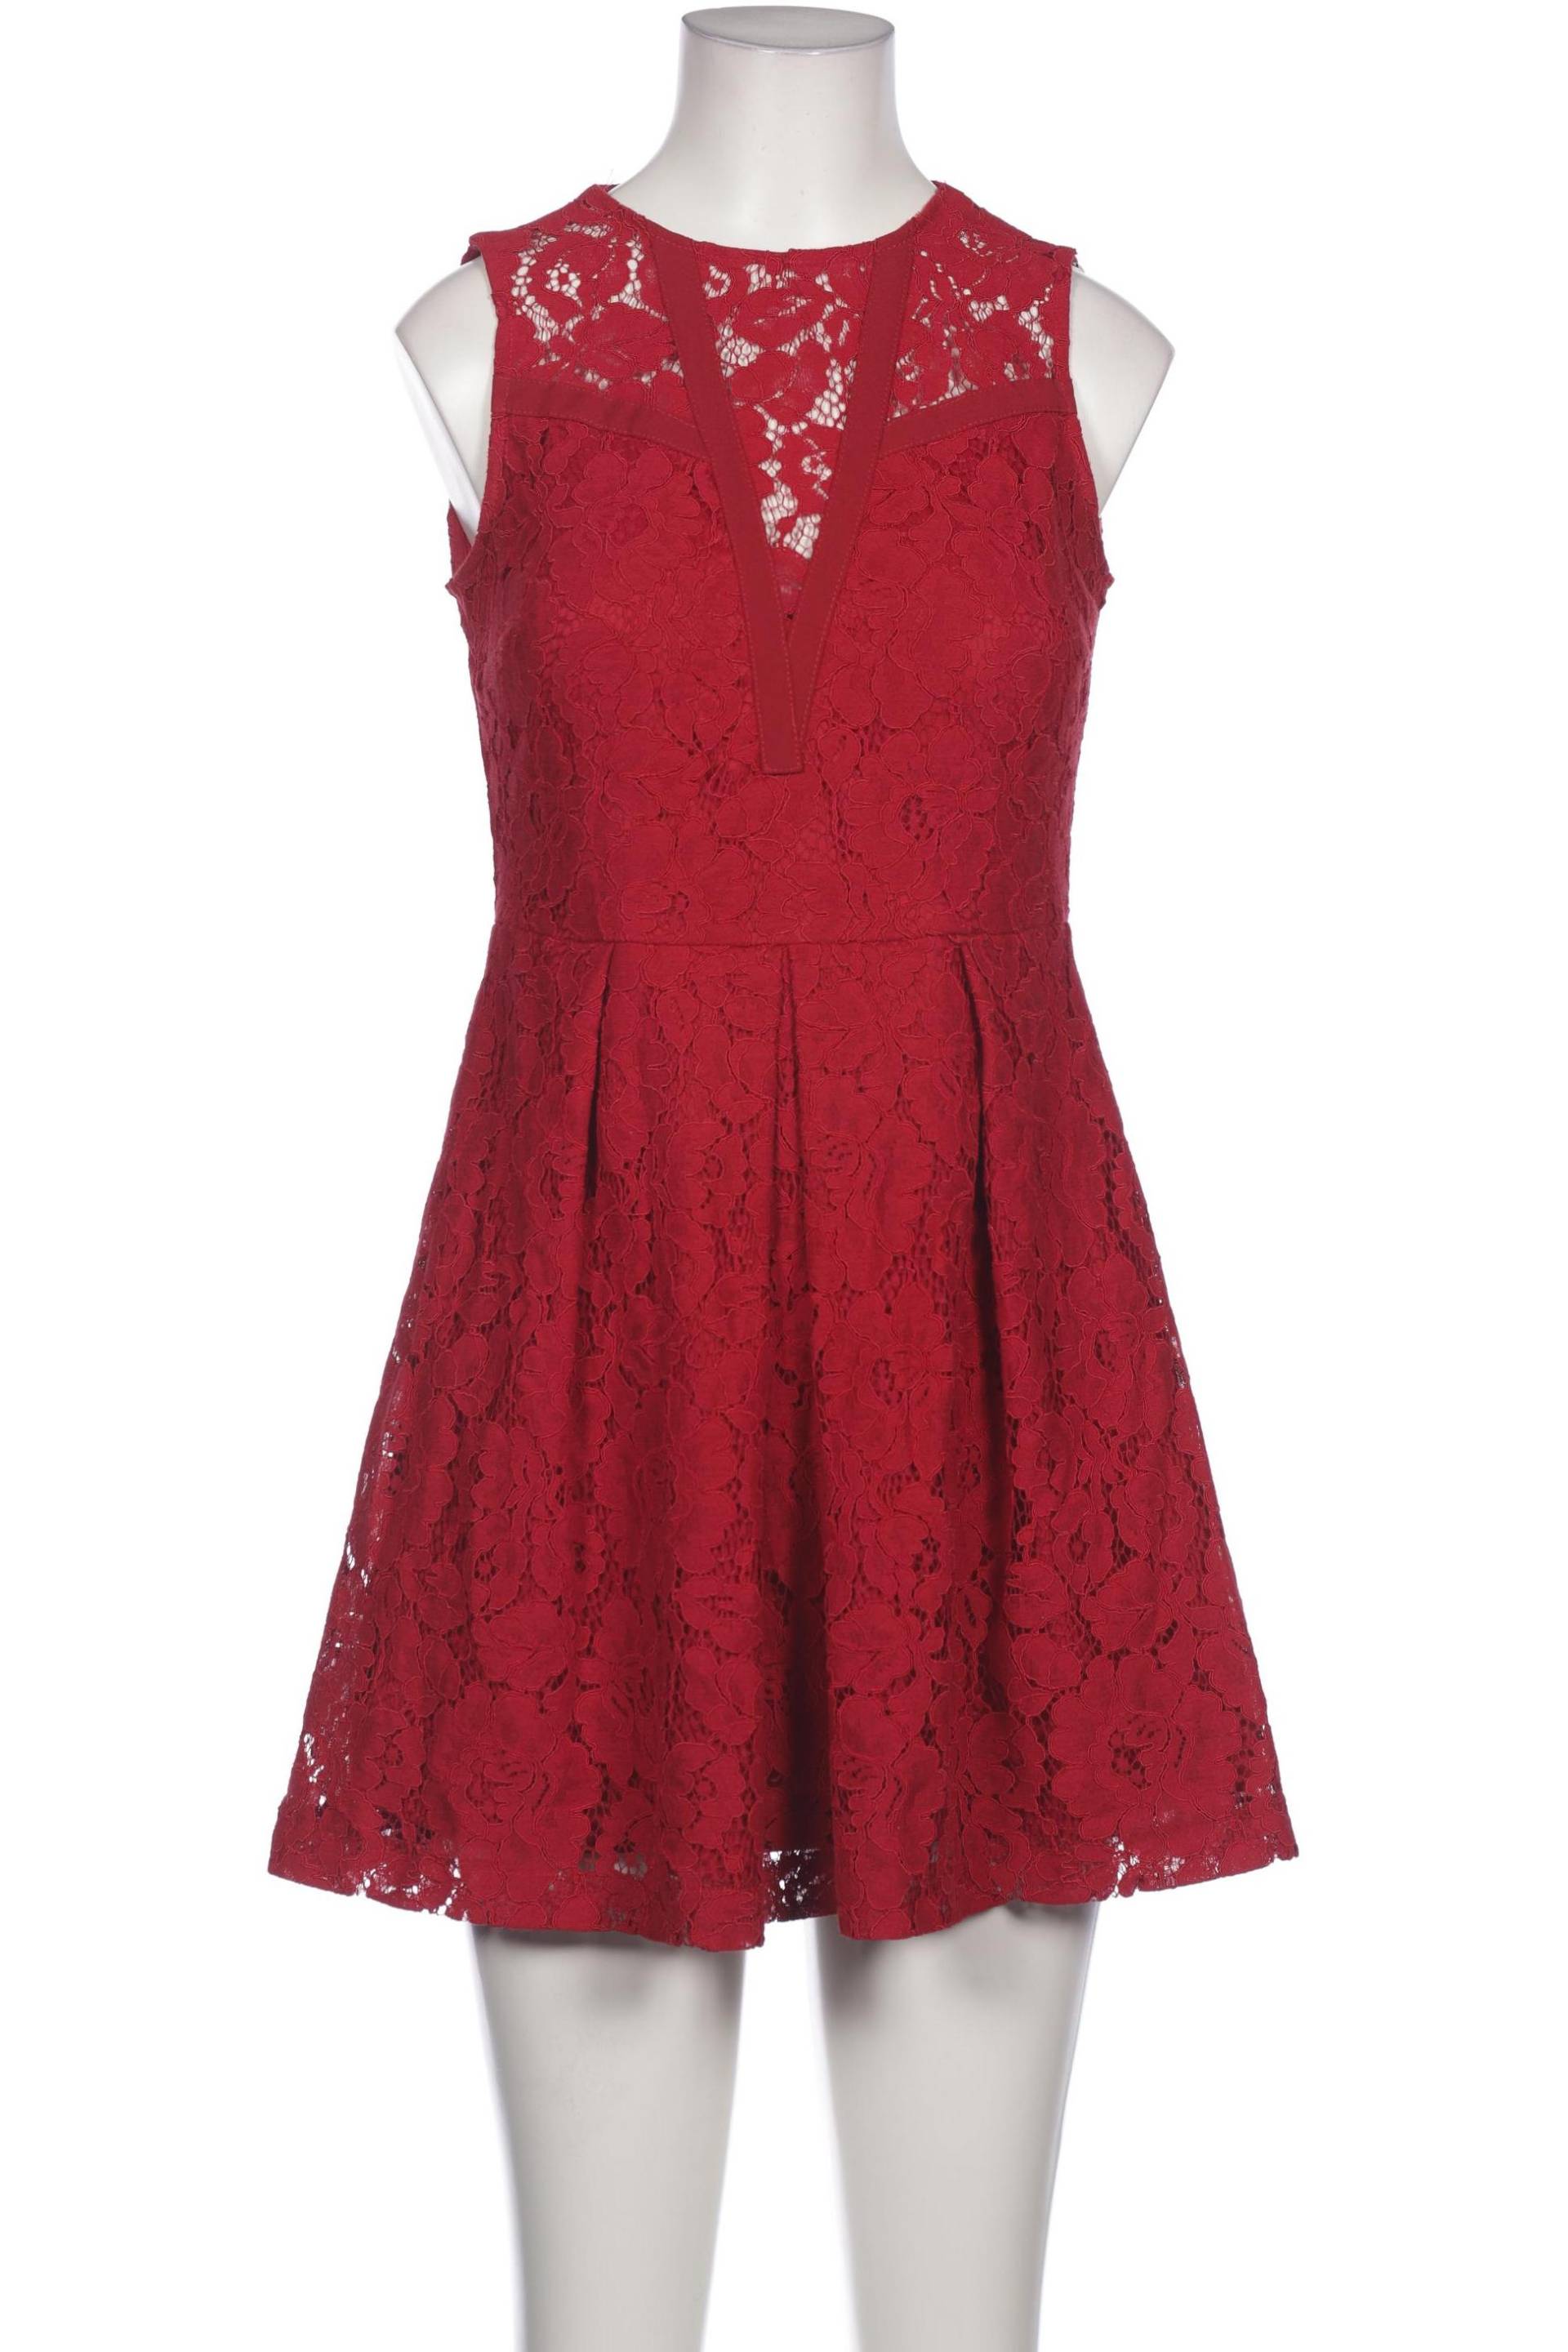 About you Damen Kleid, rot von About you